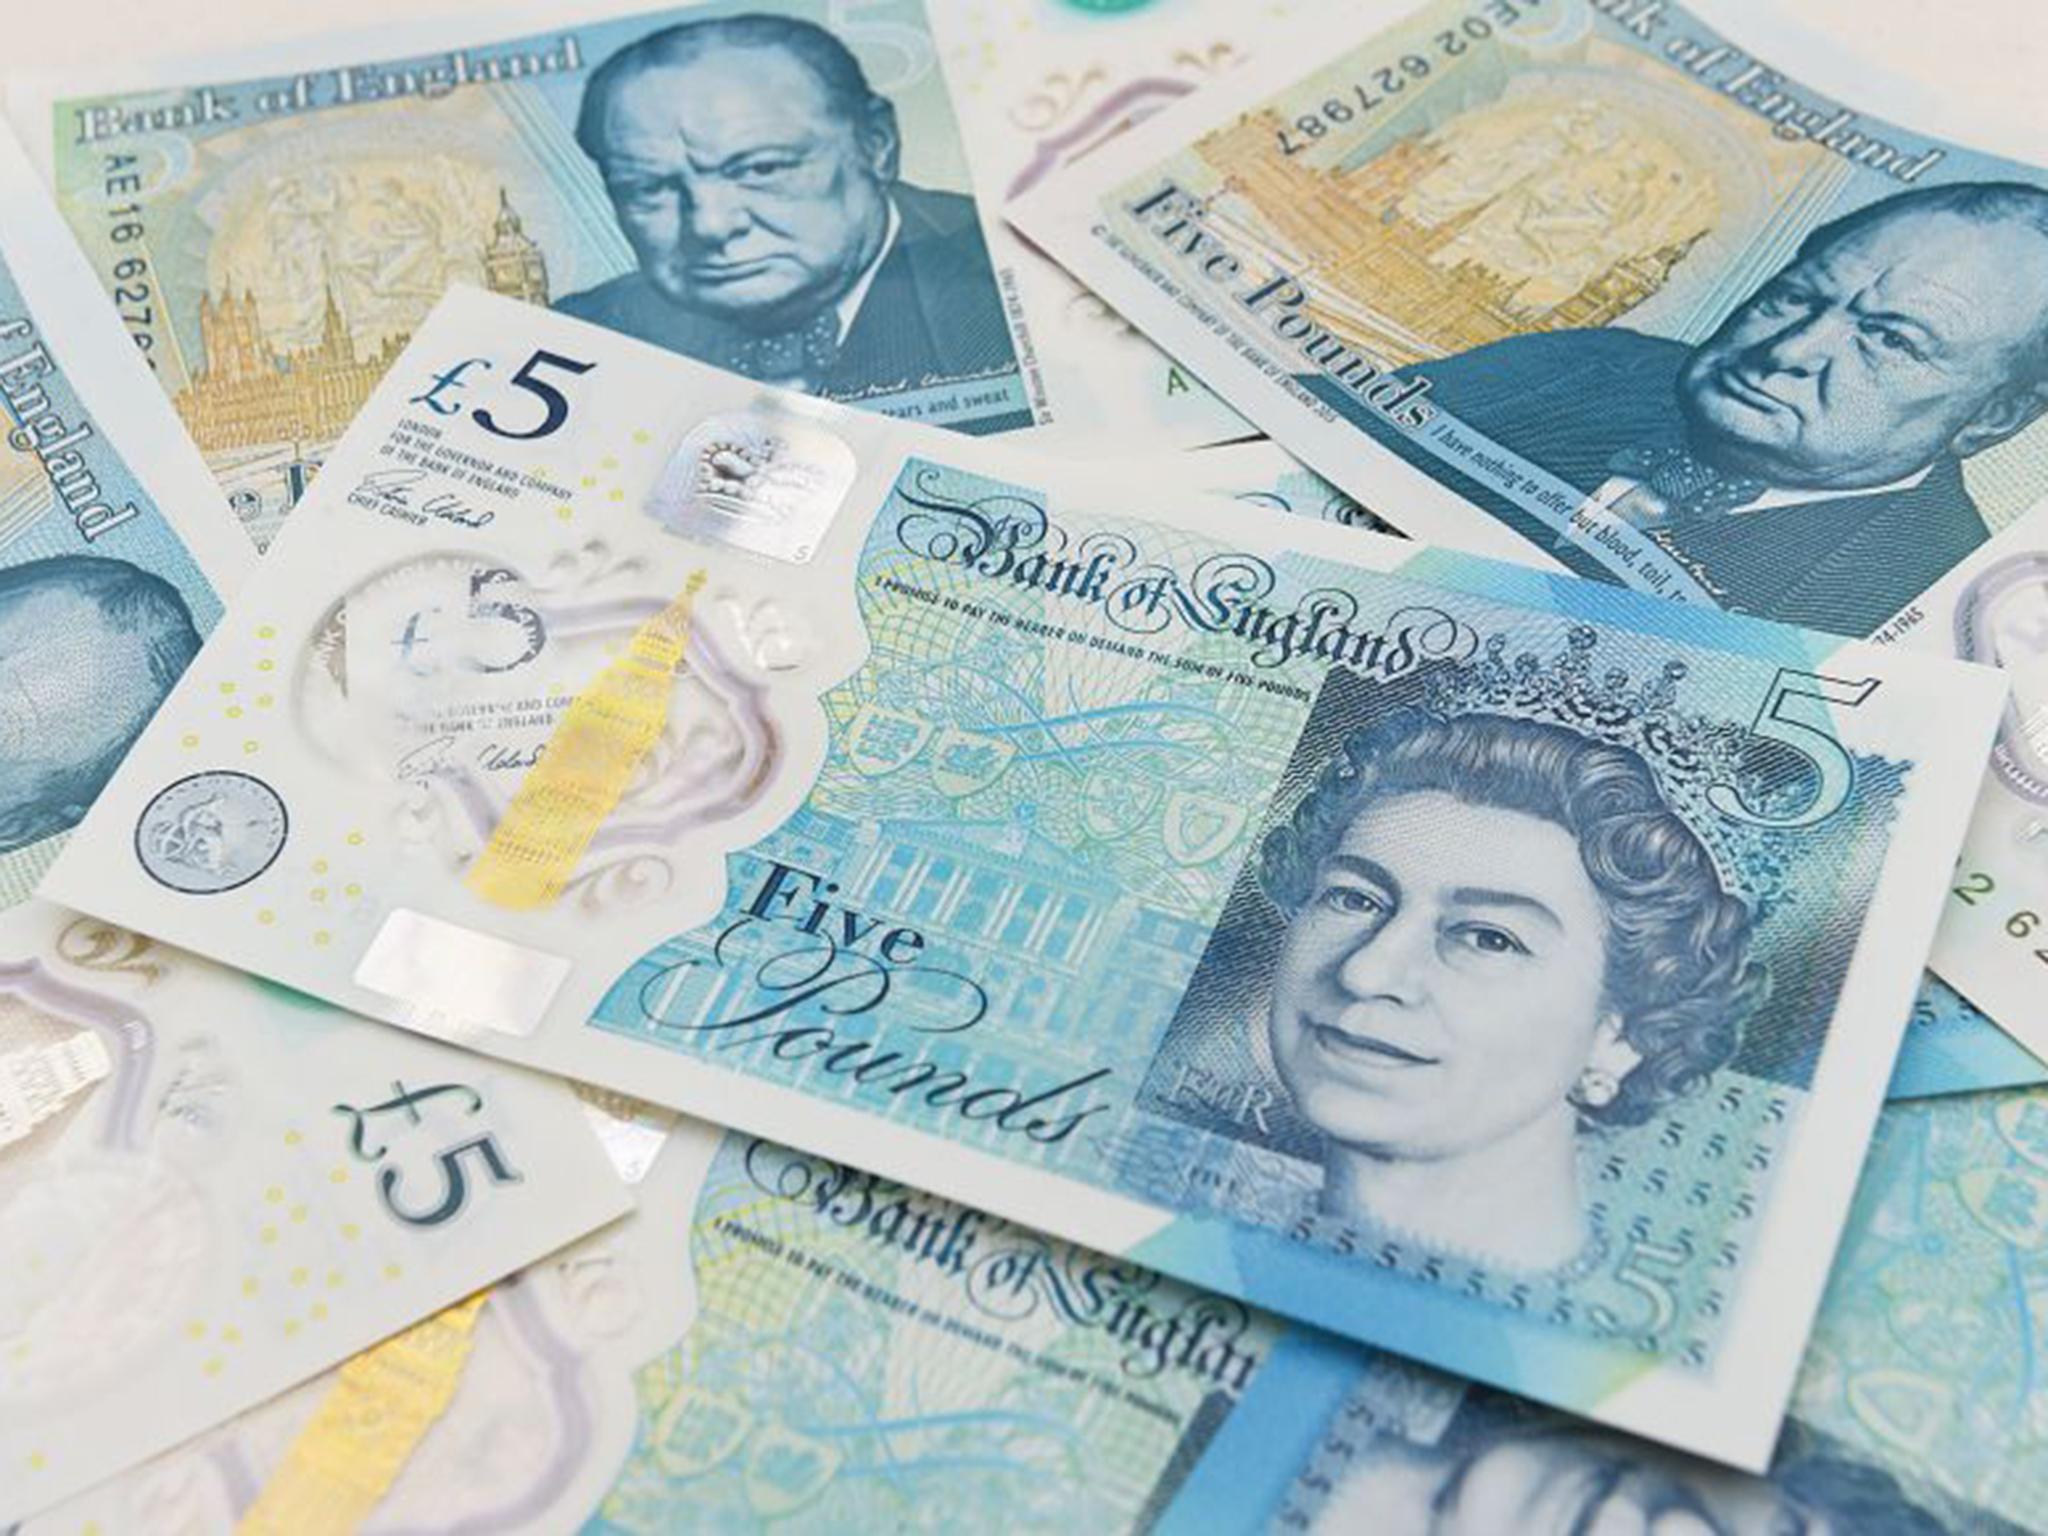 More than 120,000 people have supported an online petition urging the Bank of England to cease using animal fat in the production of five pound notes